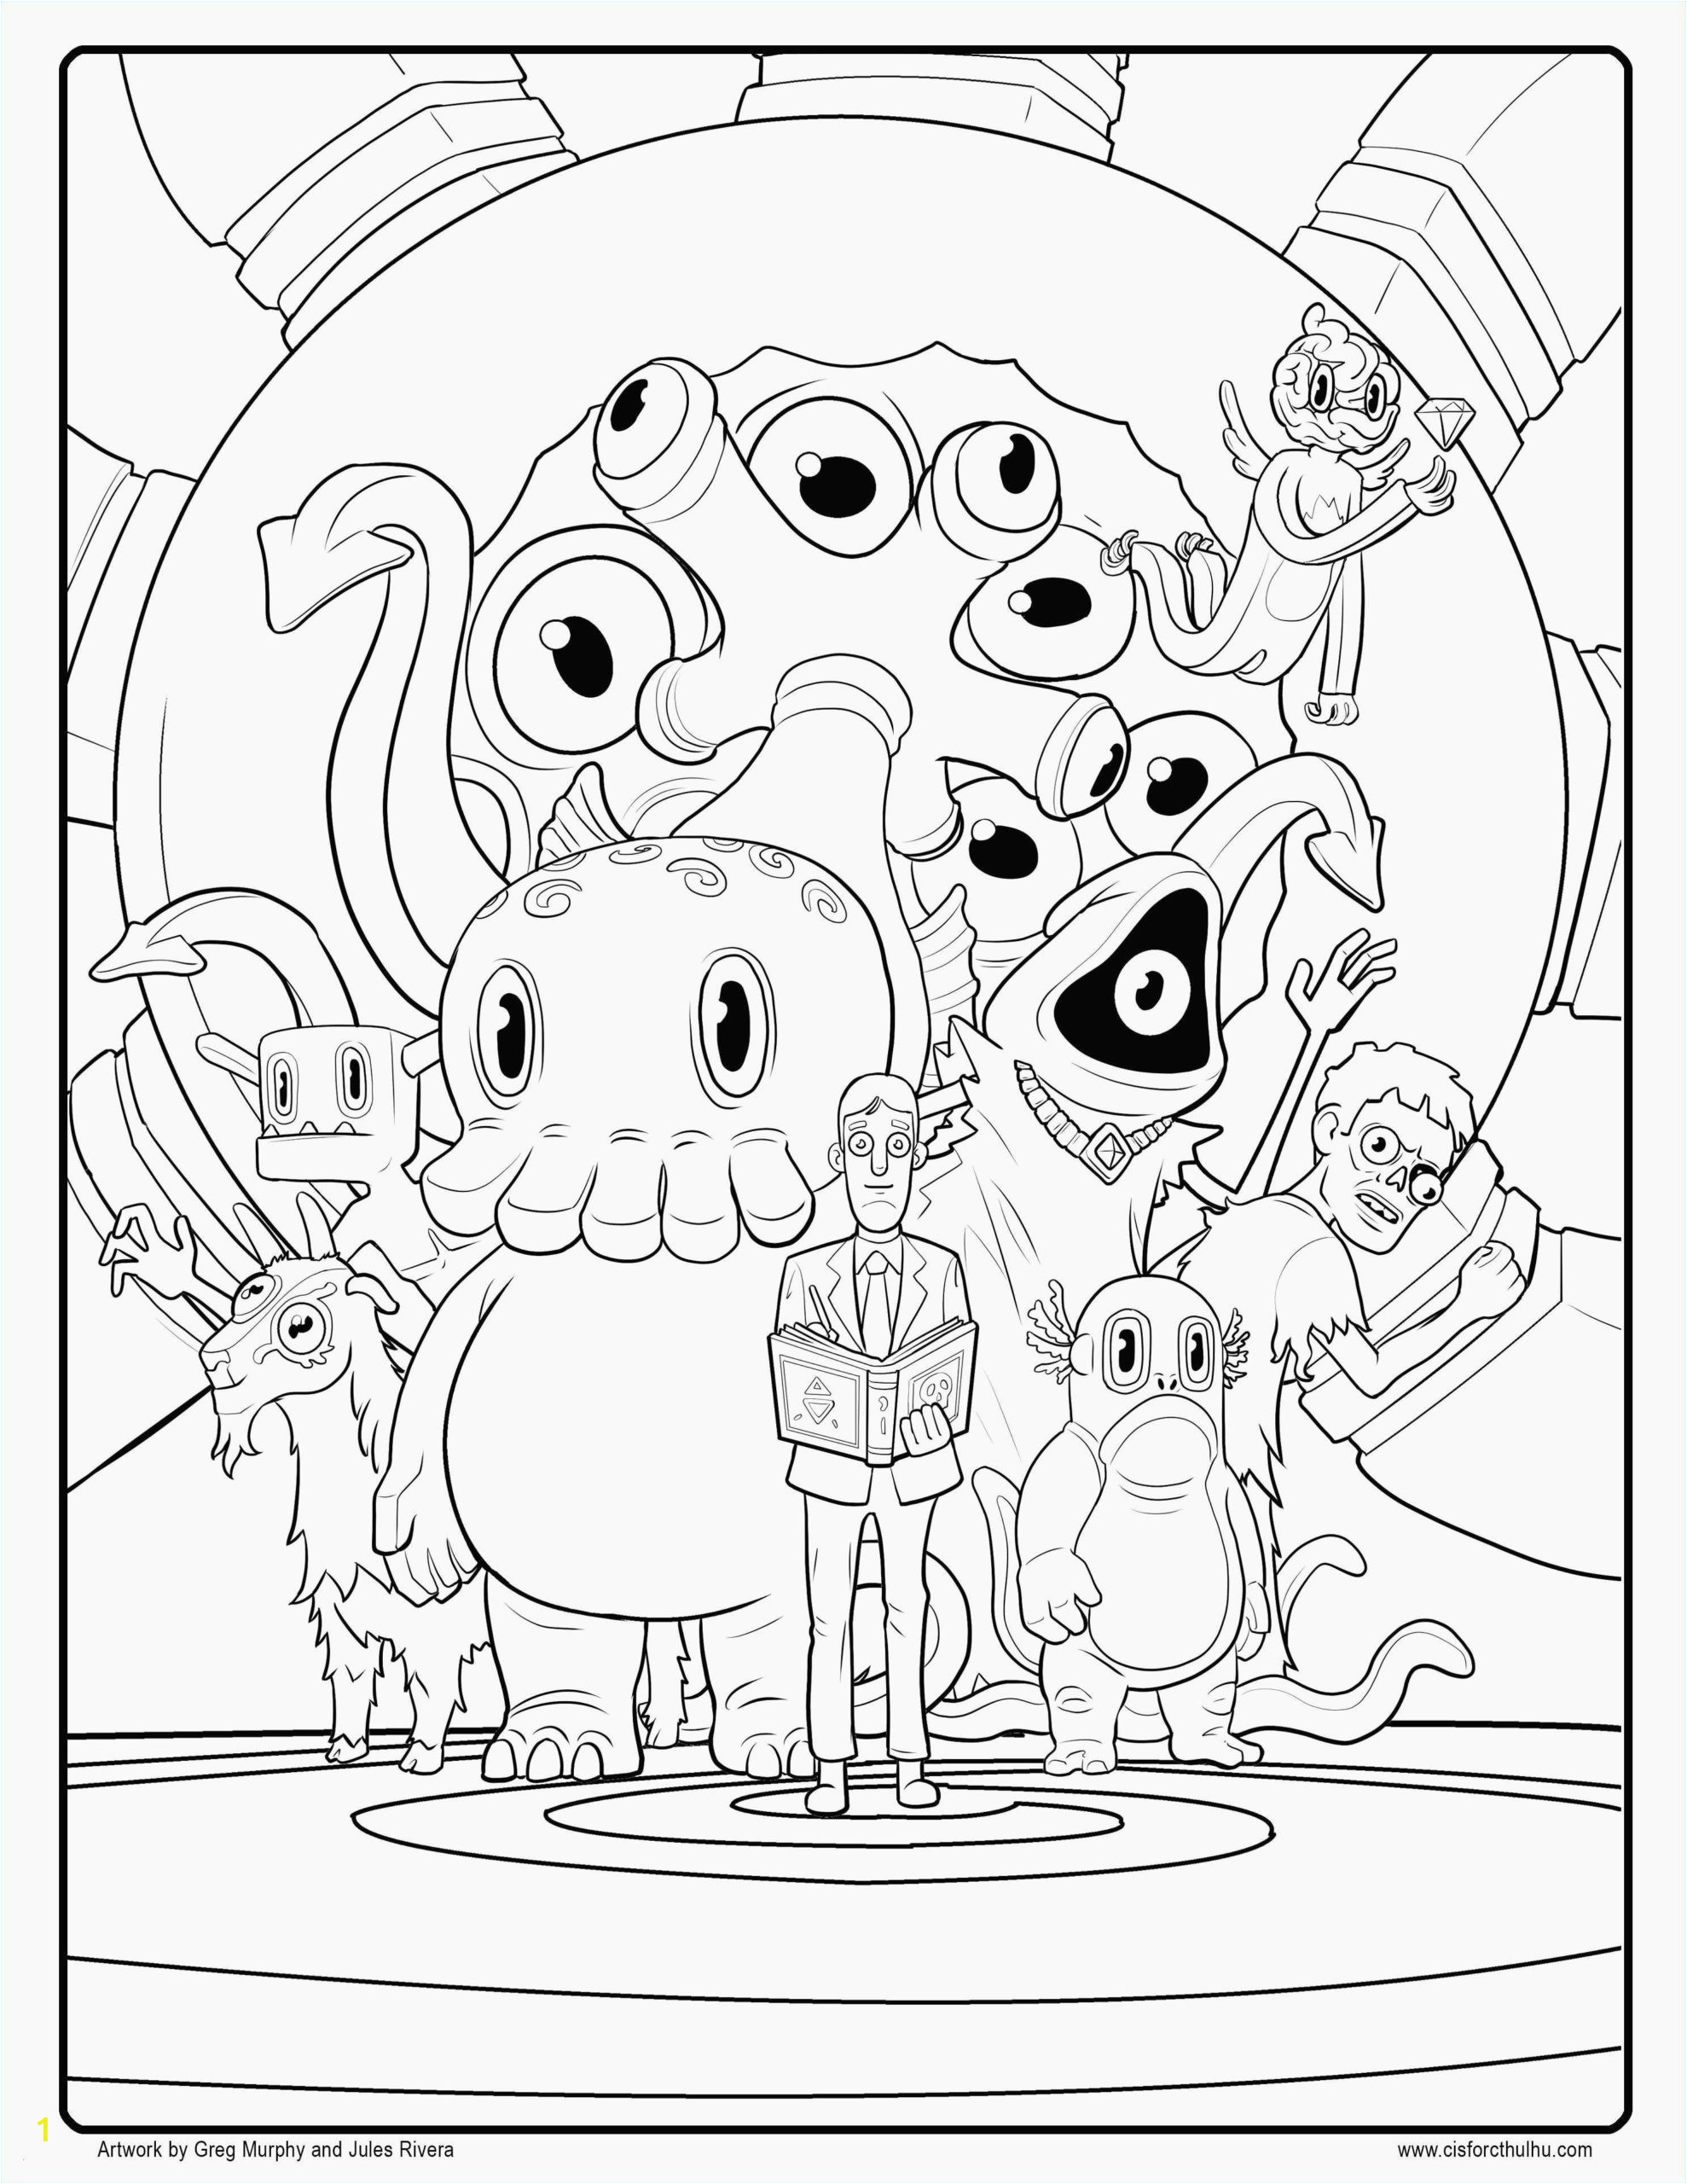 Printable Octonauts Coloring Pages 58 Most Mean Color by Number Print Veggietales Coloring